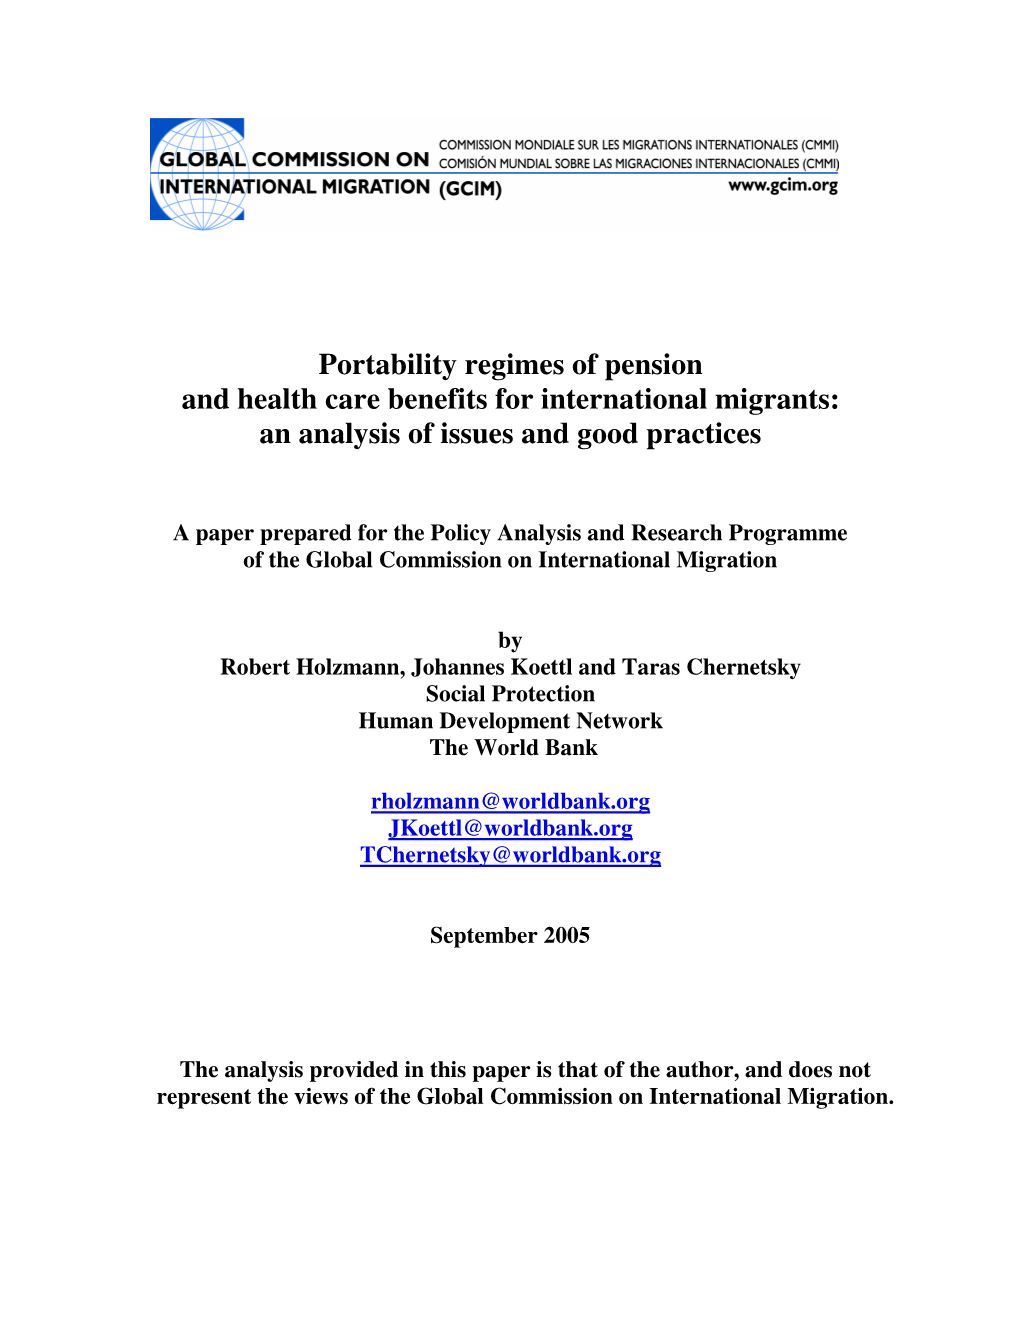 Portability Regimes of Pension and Health Care Benefits for International Migrants: an Analysis of Issues and Good Practices